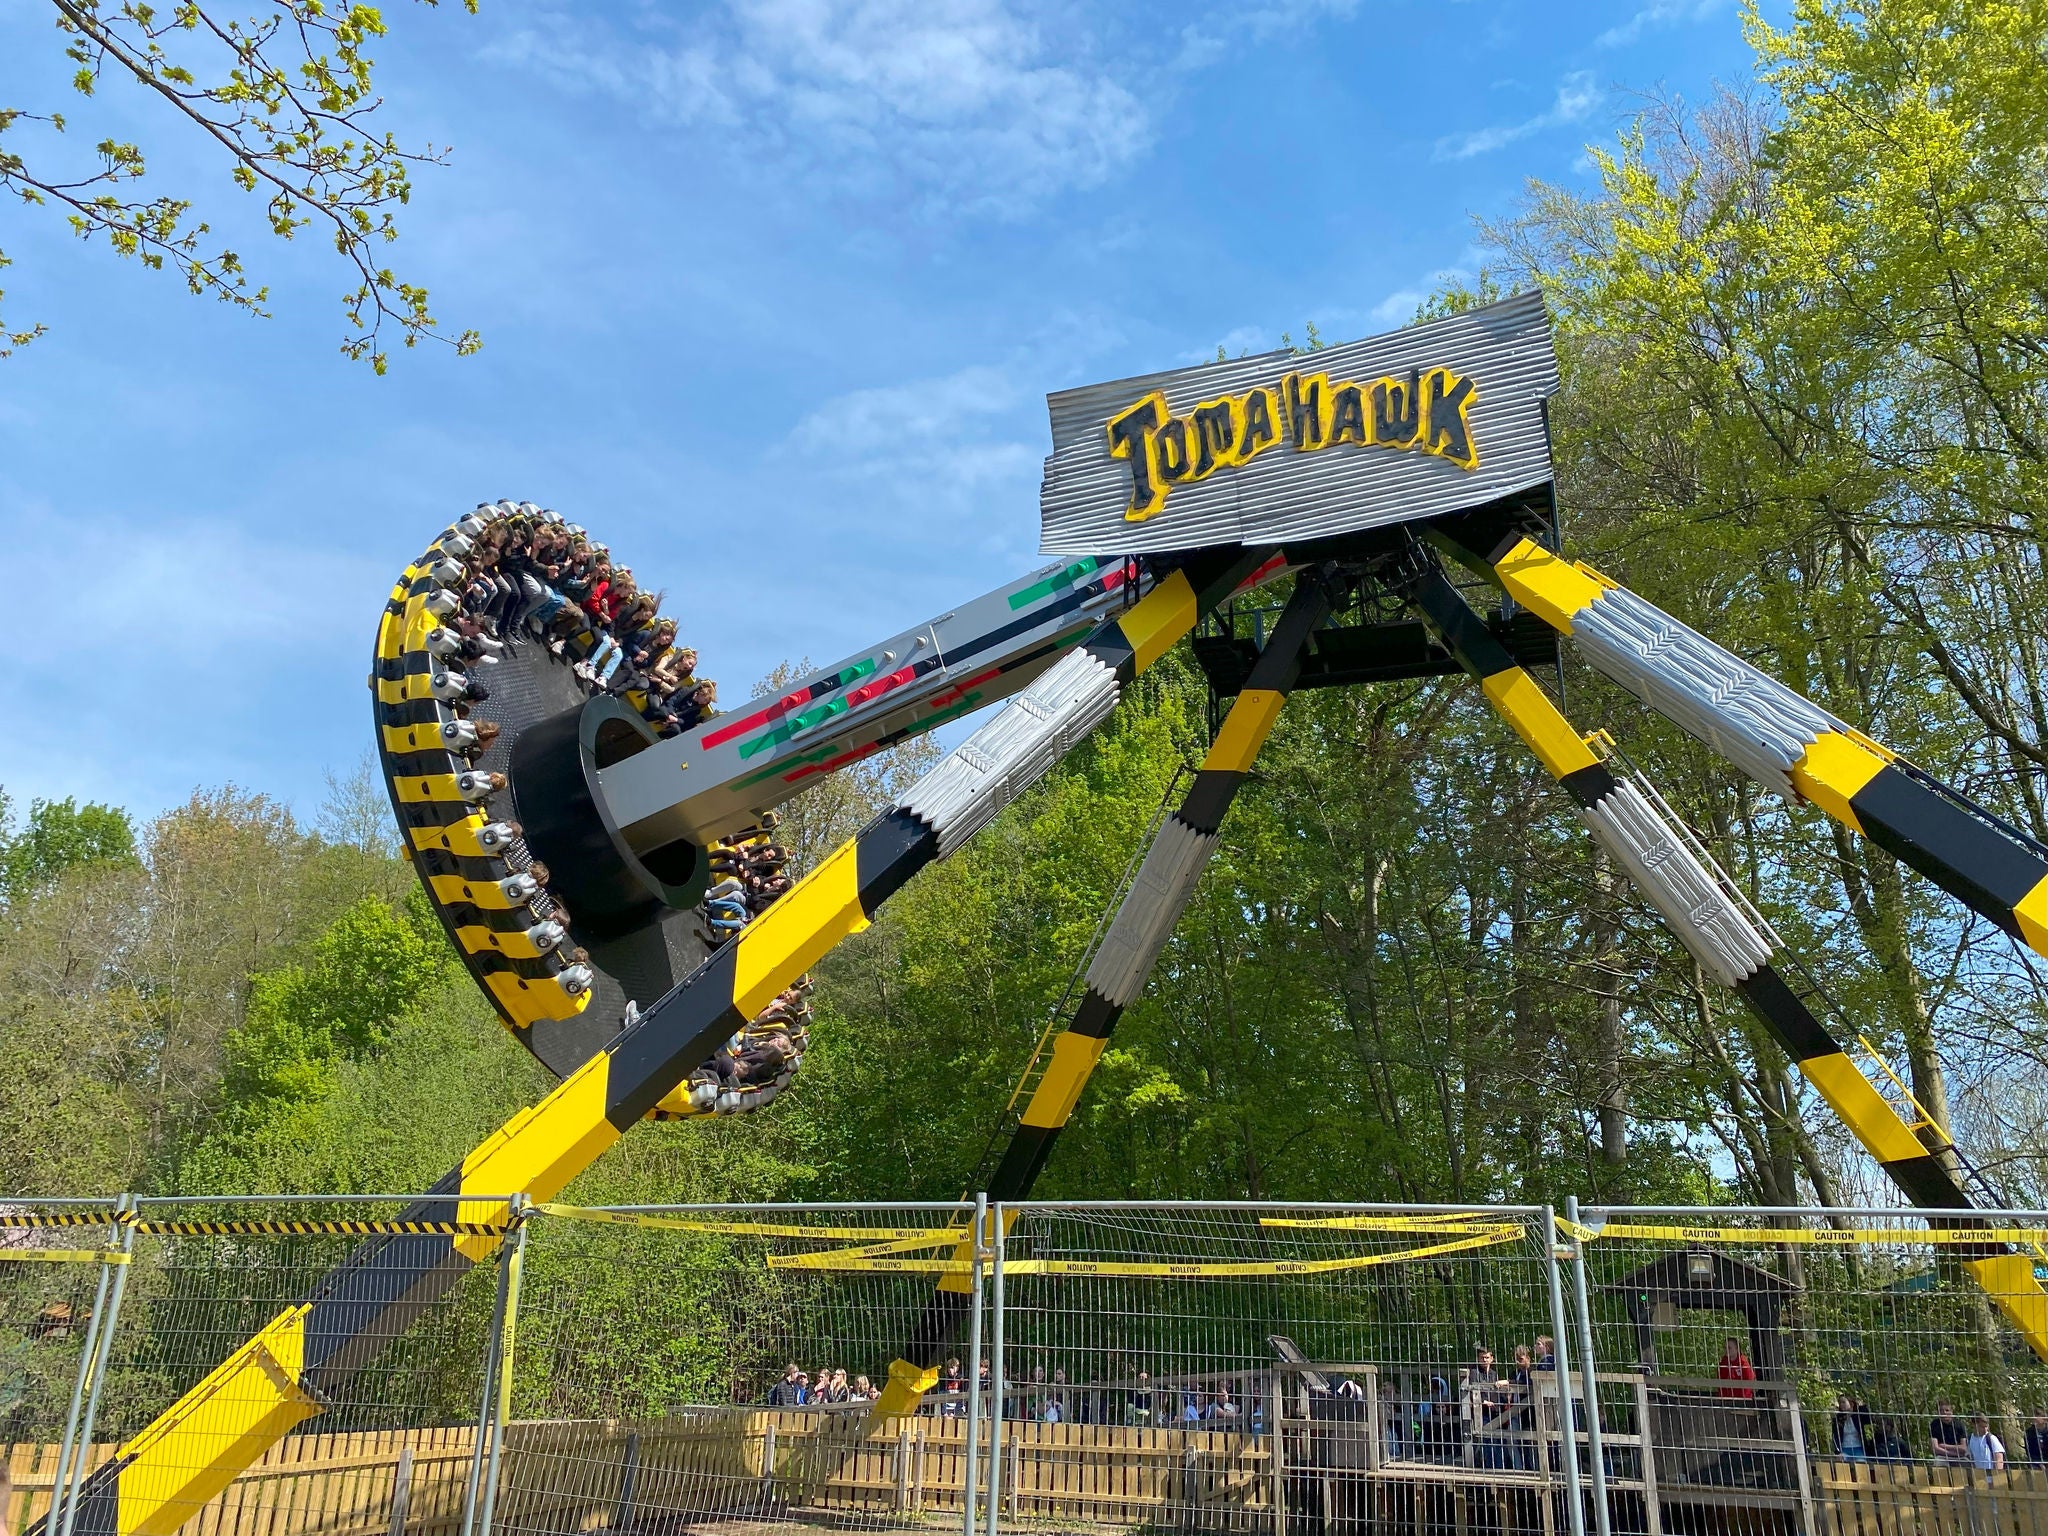 The frisbee attraction Tomahawk at Walibi Holland.